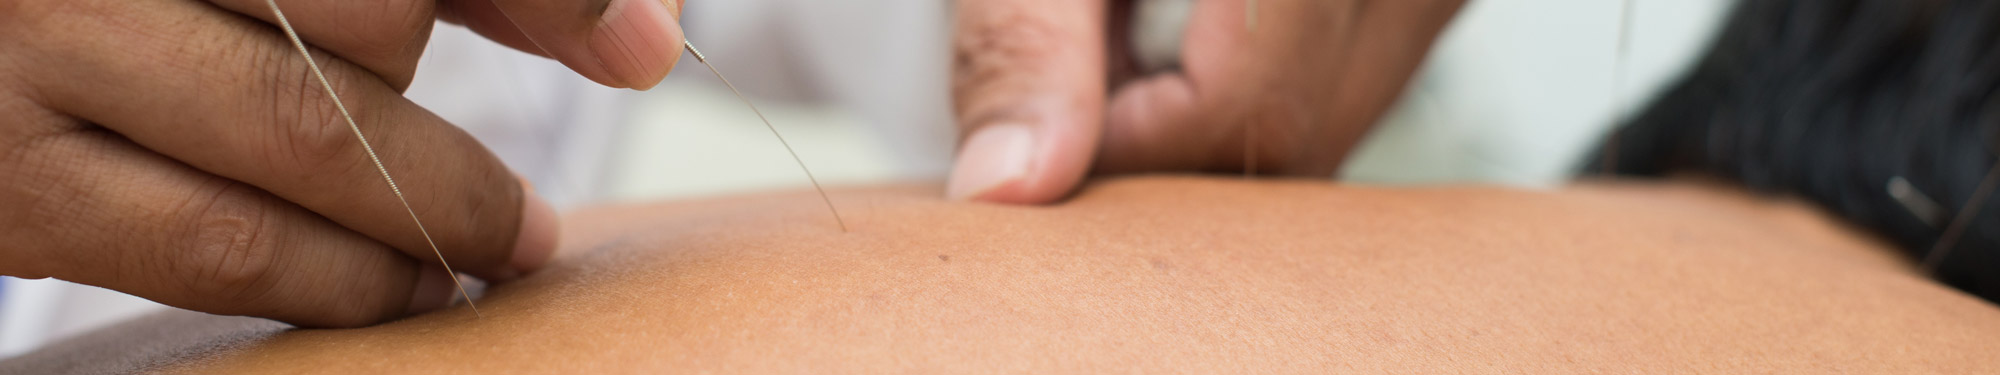 doctor performing acupuncture on patient's back